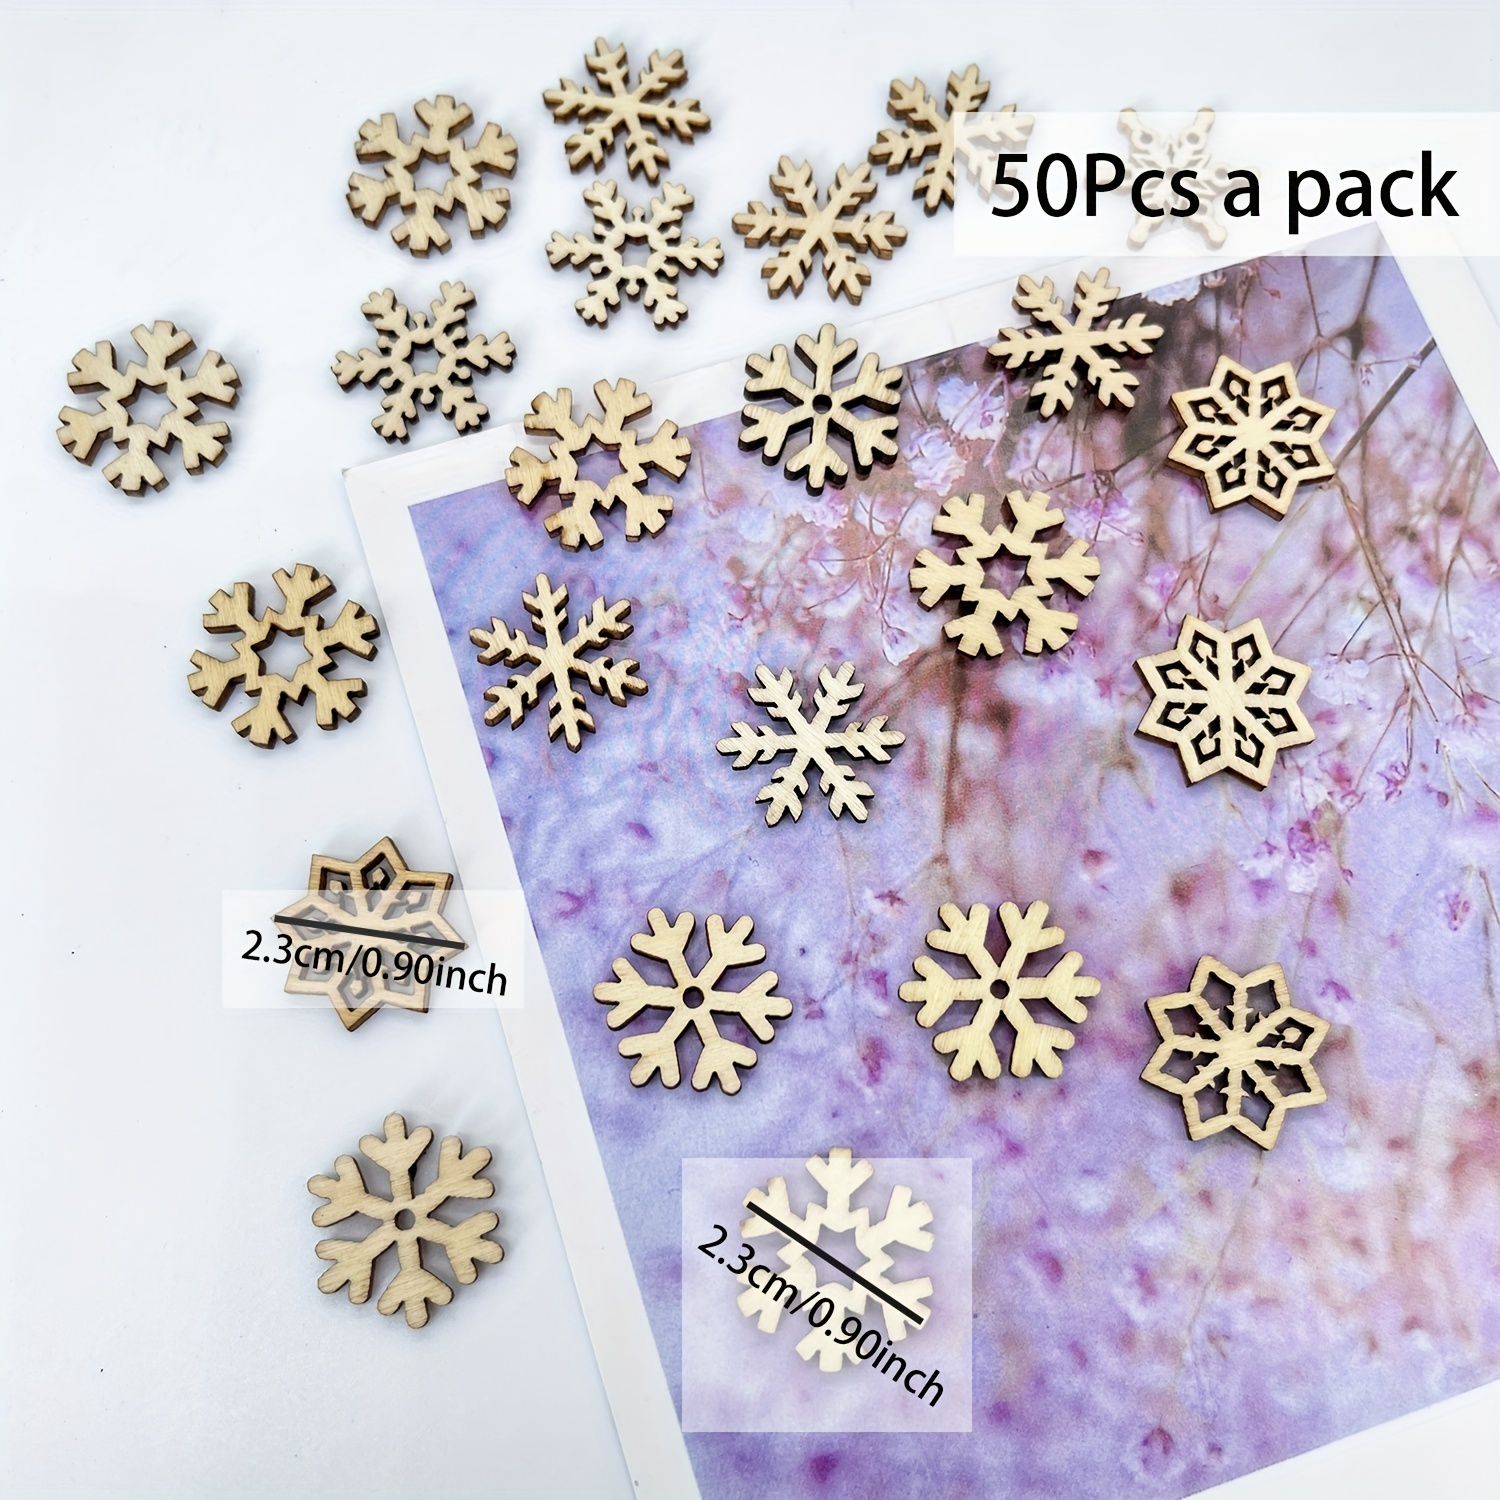 50pcs Wooden Christmas Tree Ornaments Mini Snowflake Tree Hanging Pendants  Christmas Decorations for Home New Year Gift